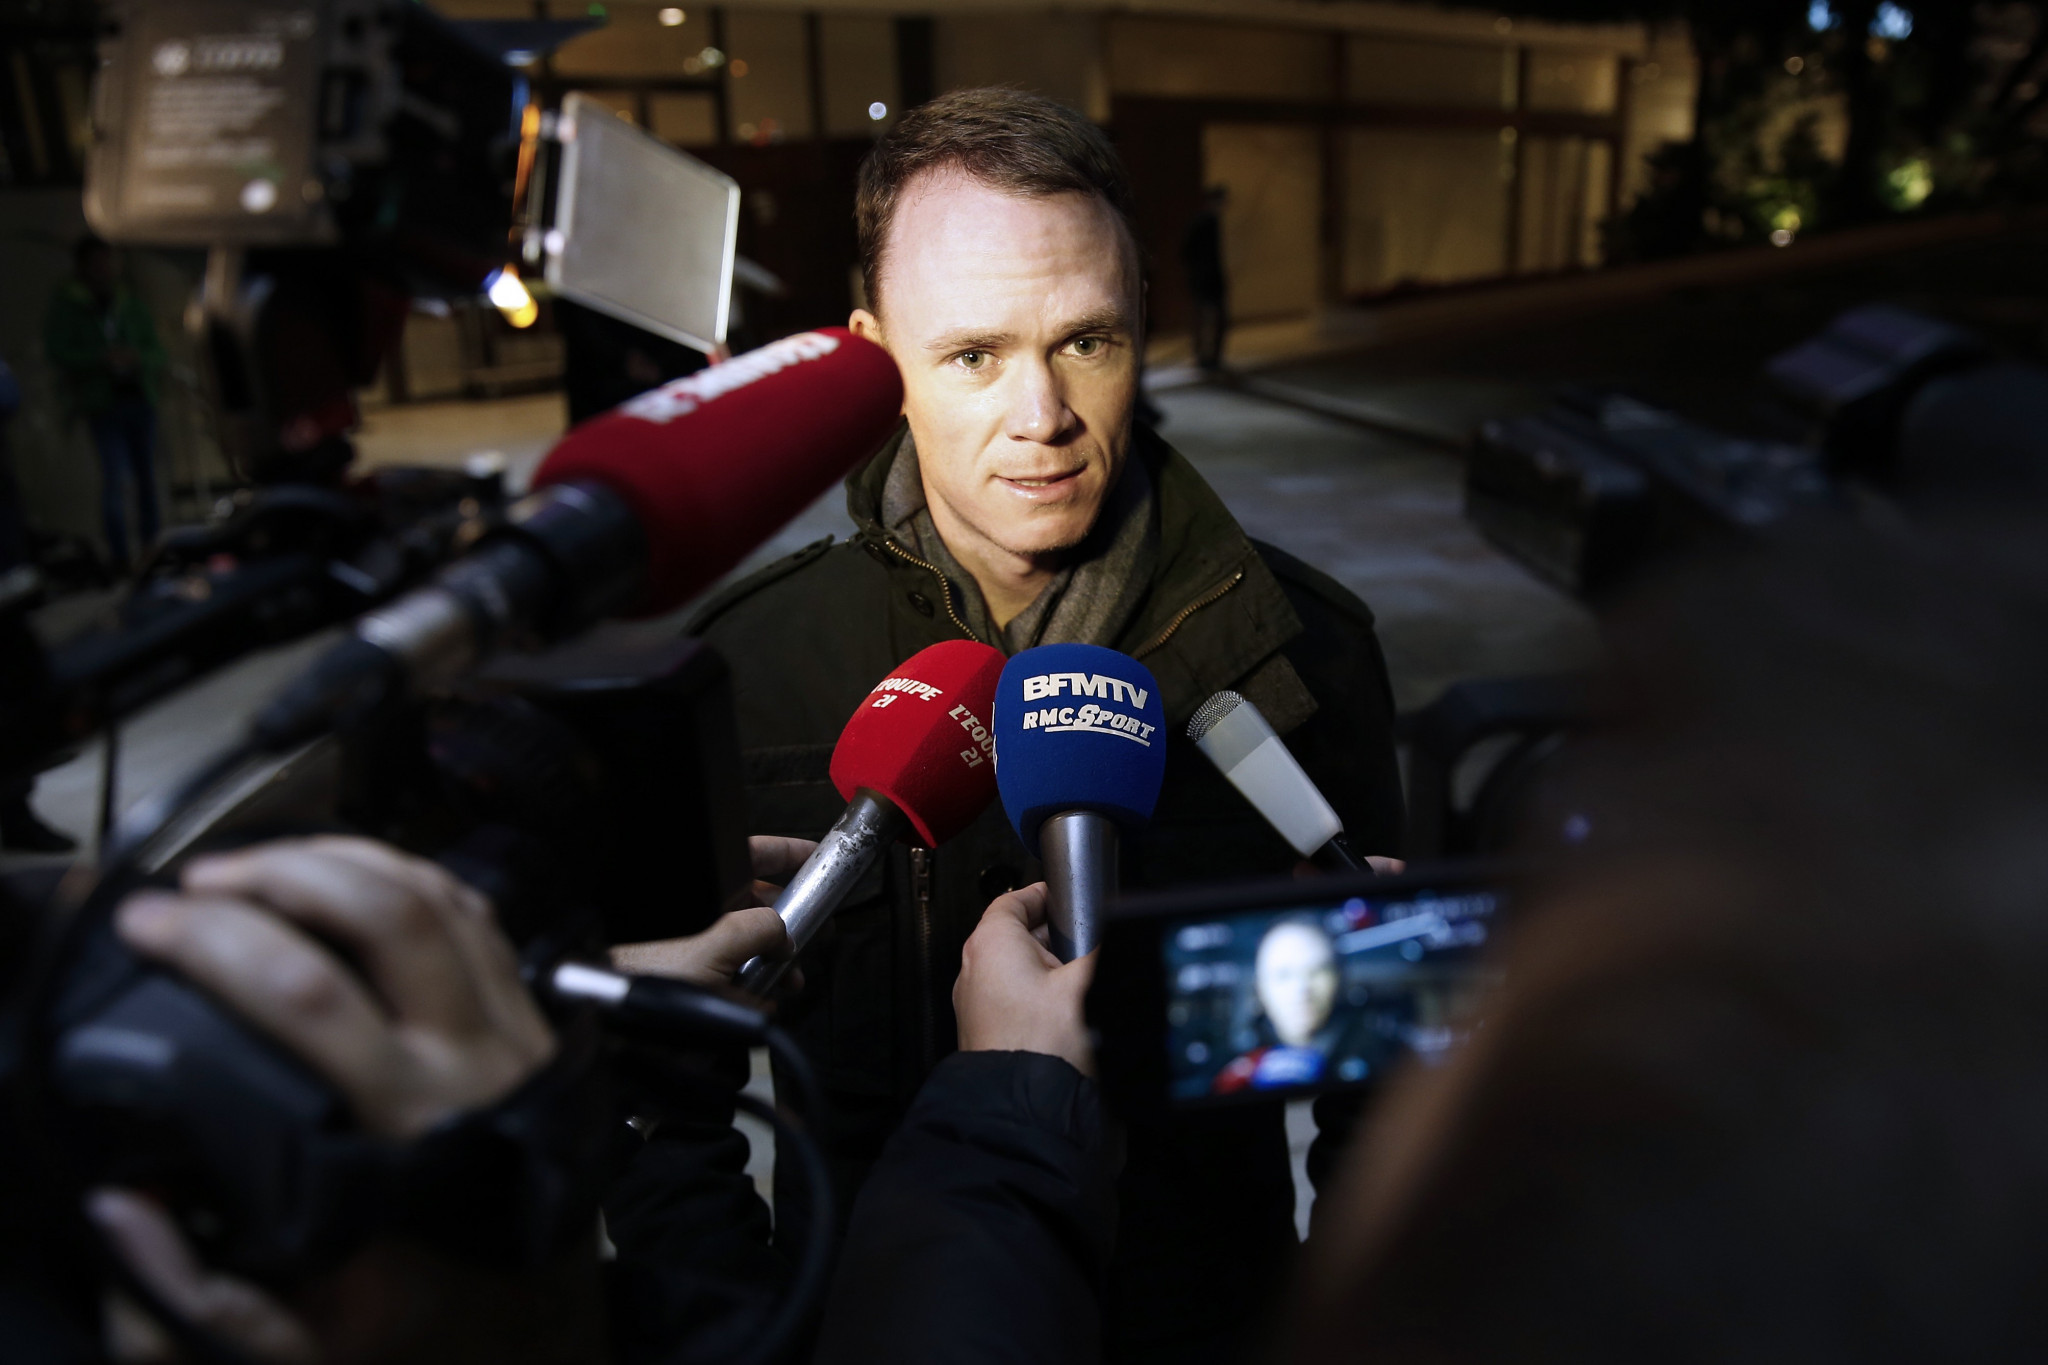 Tour de France winner Christopher Froome speaks to the press before the start of the Peace and Sport walk on November 25, 2015 in Monaco ©Getty Images